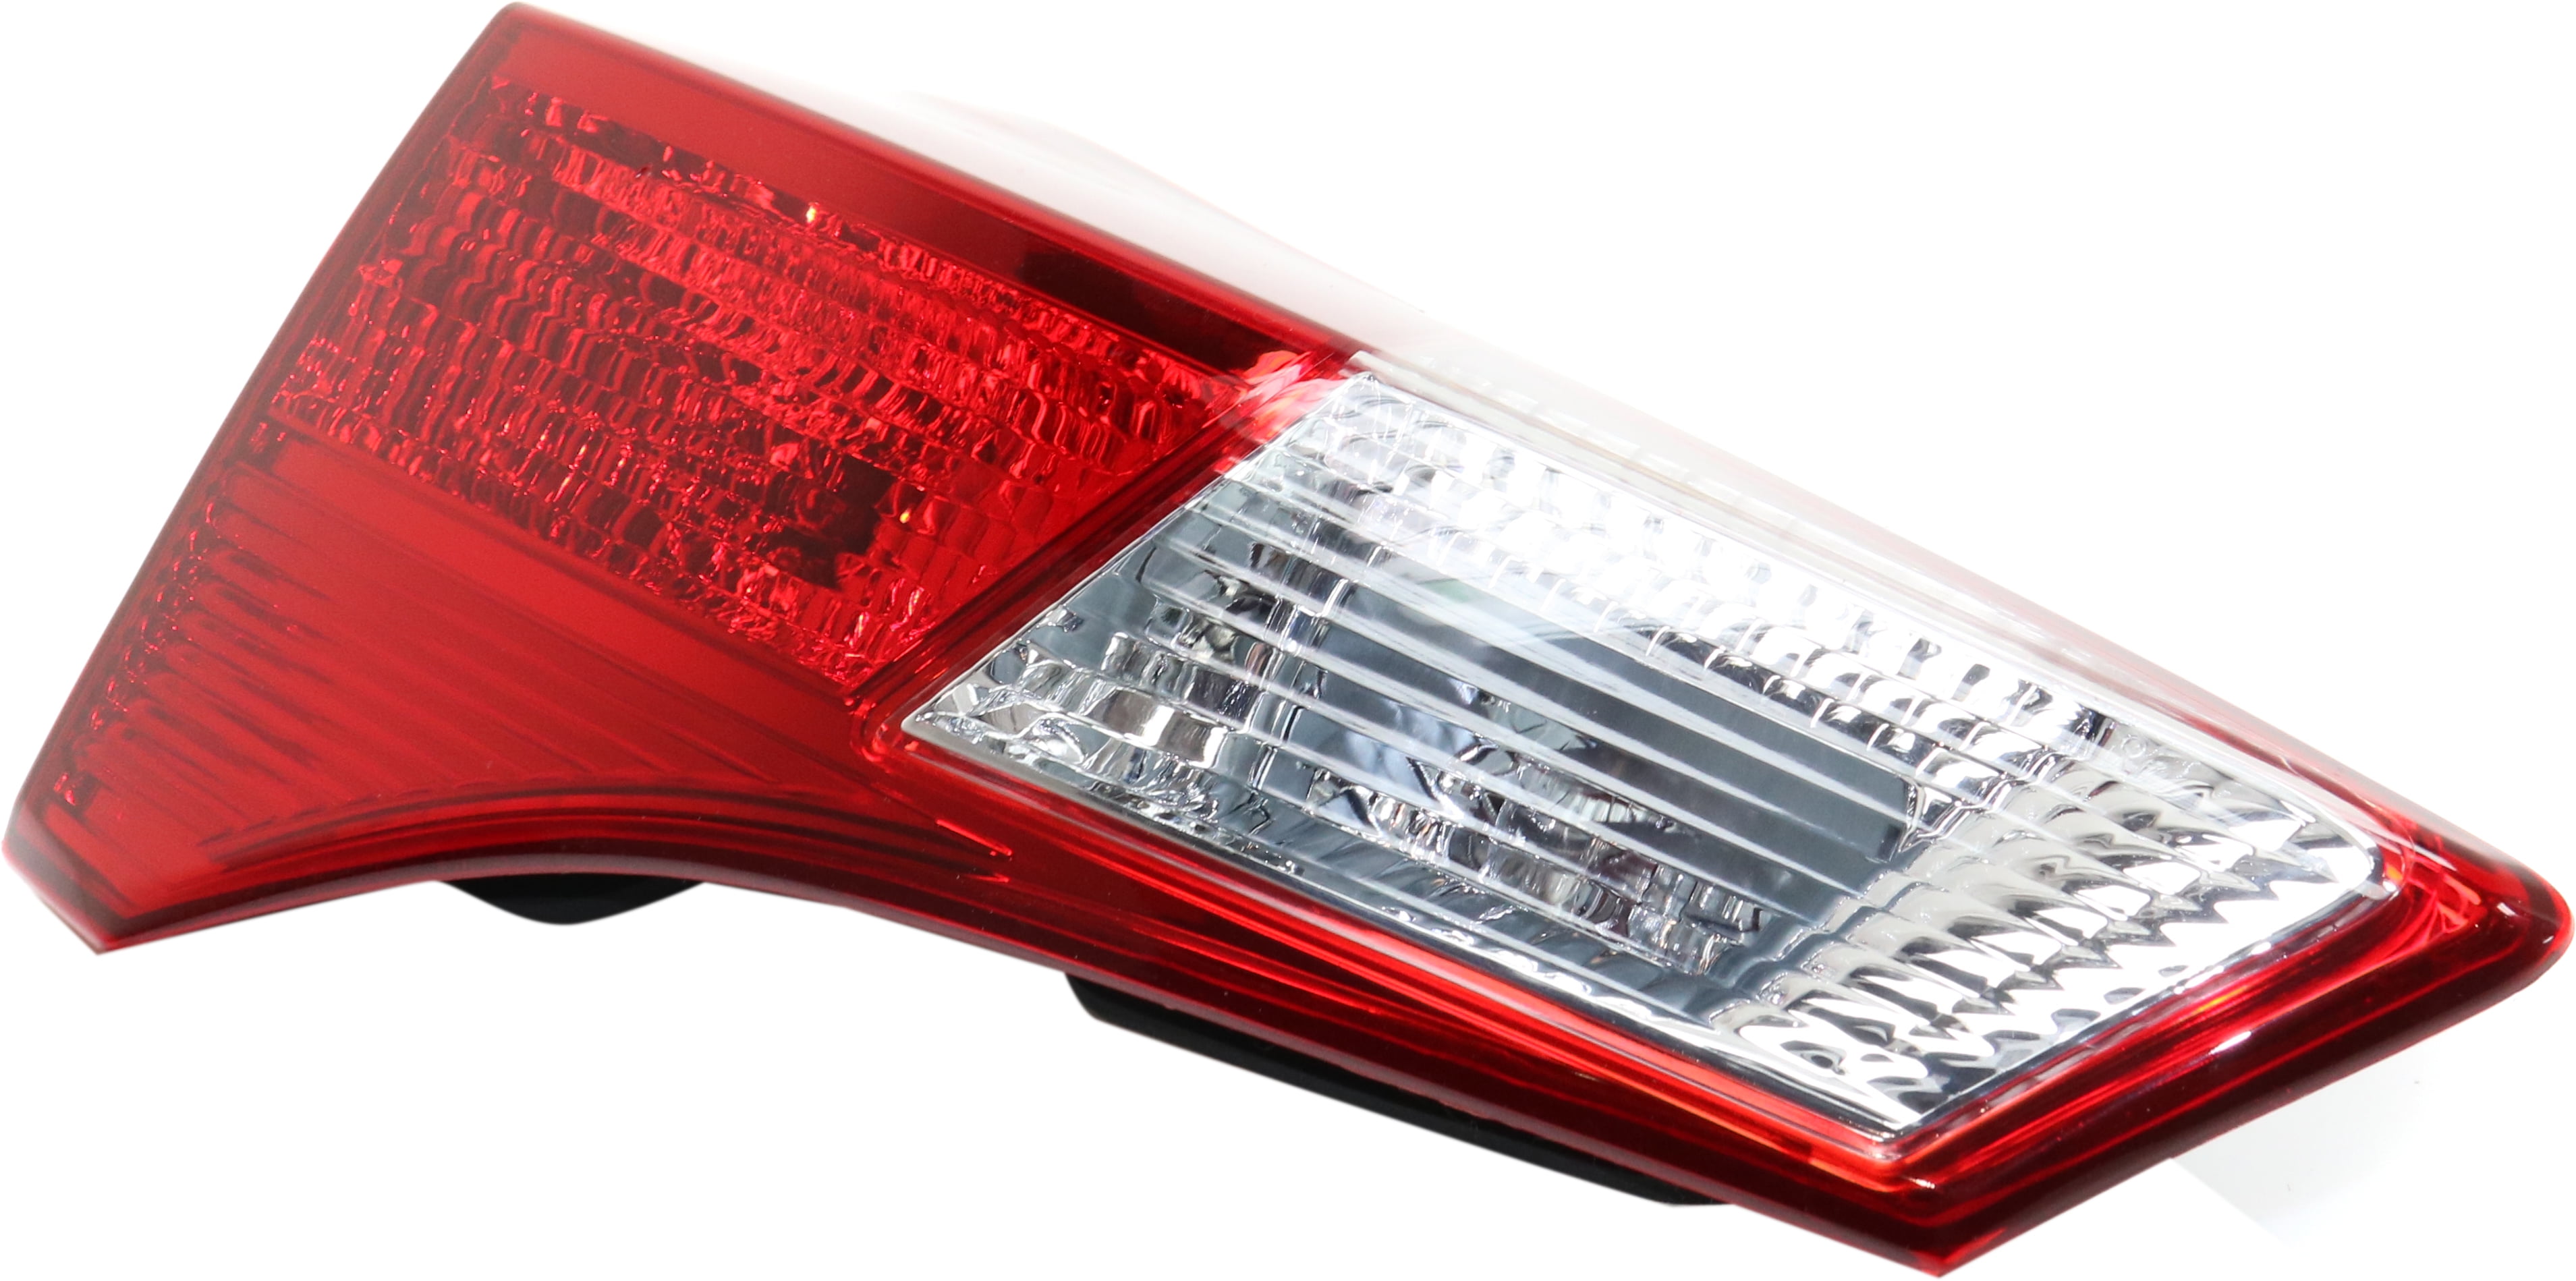 Tail Light Compatible With 2013-2015 Toyota RAV4 Left Driver Side